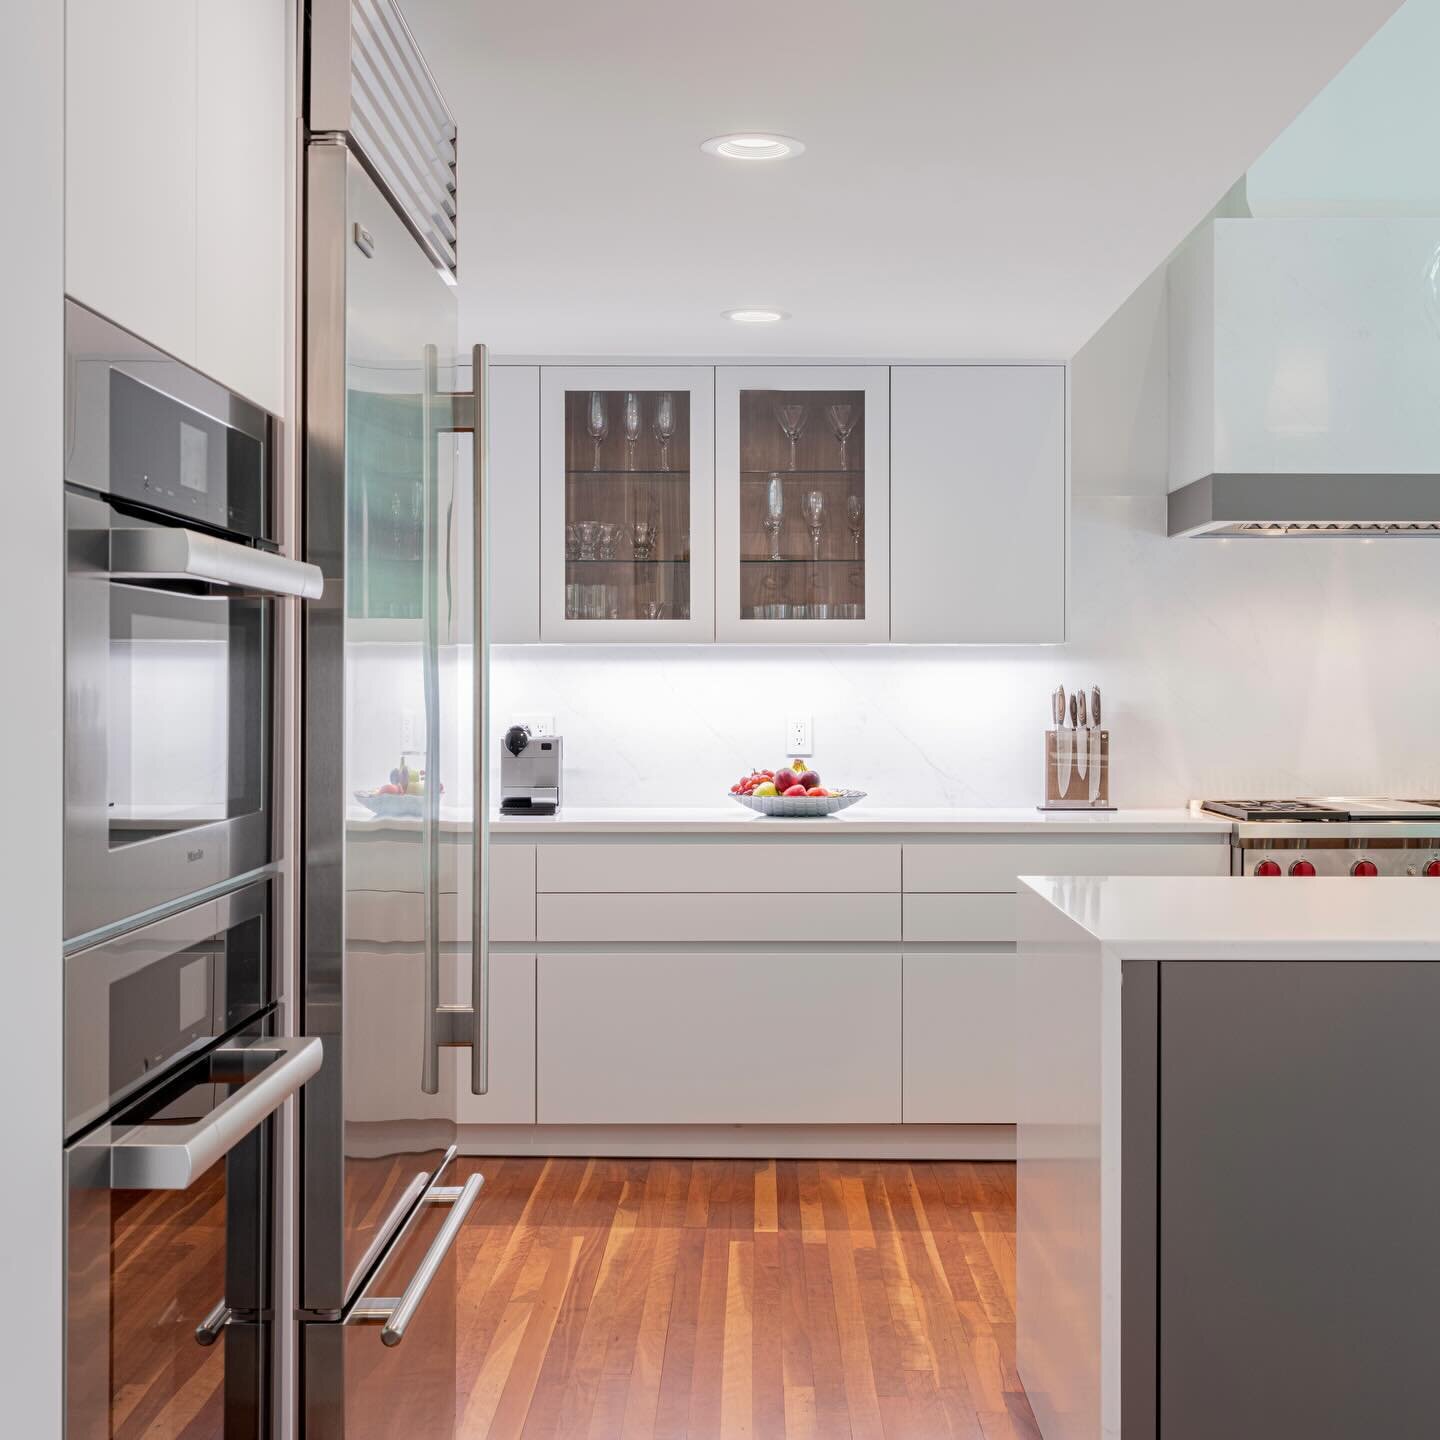 One of my favorite shots from a recent kitchen project of mine in Weston Mass! Really enjoyed making this client&rsquo;s vision a reality and am very happy to hear they love the space! 
Installation: Shalom G Construction

#kitchen #kitchendesign #mo